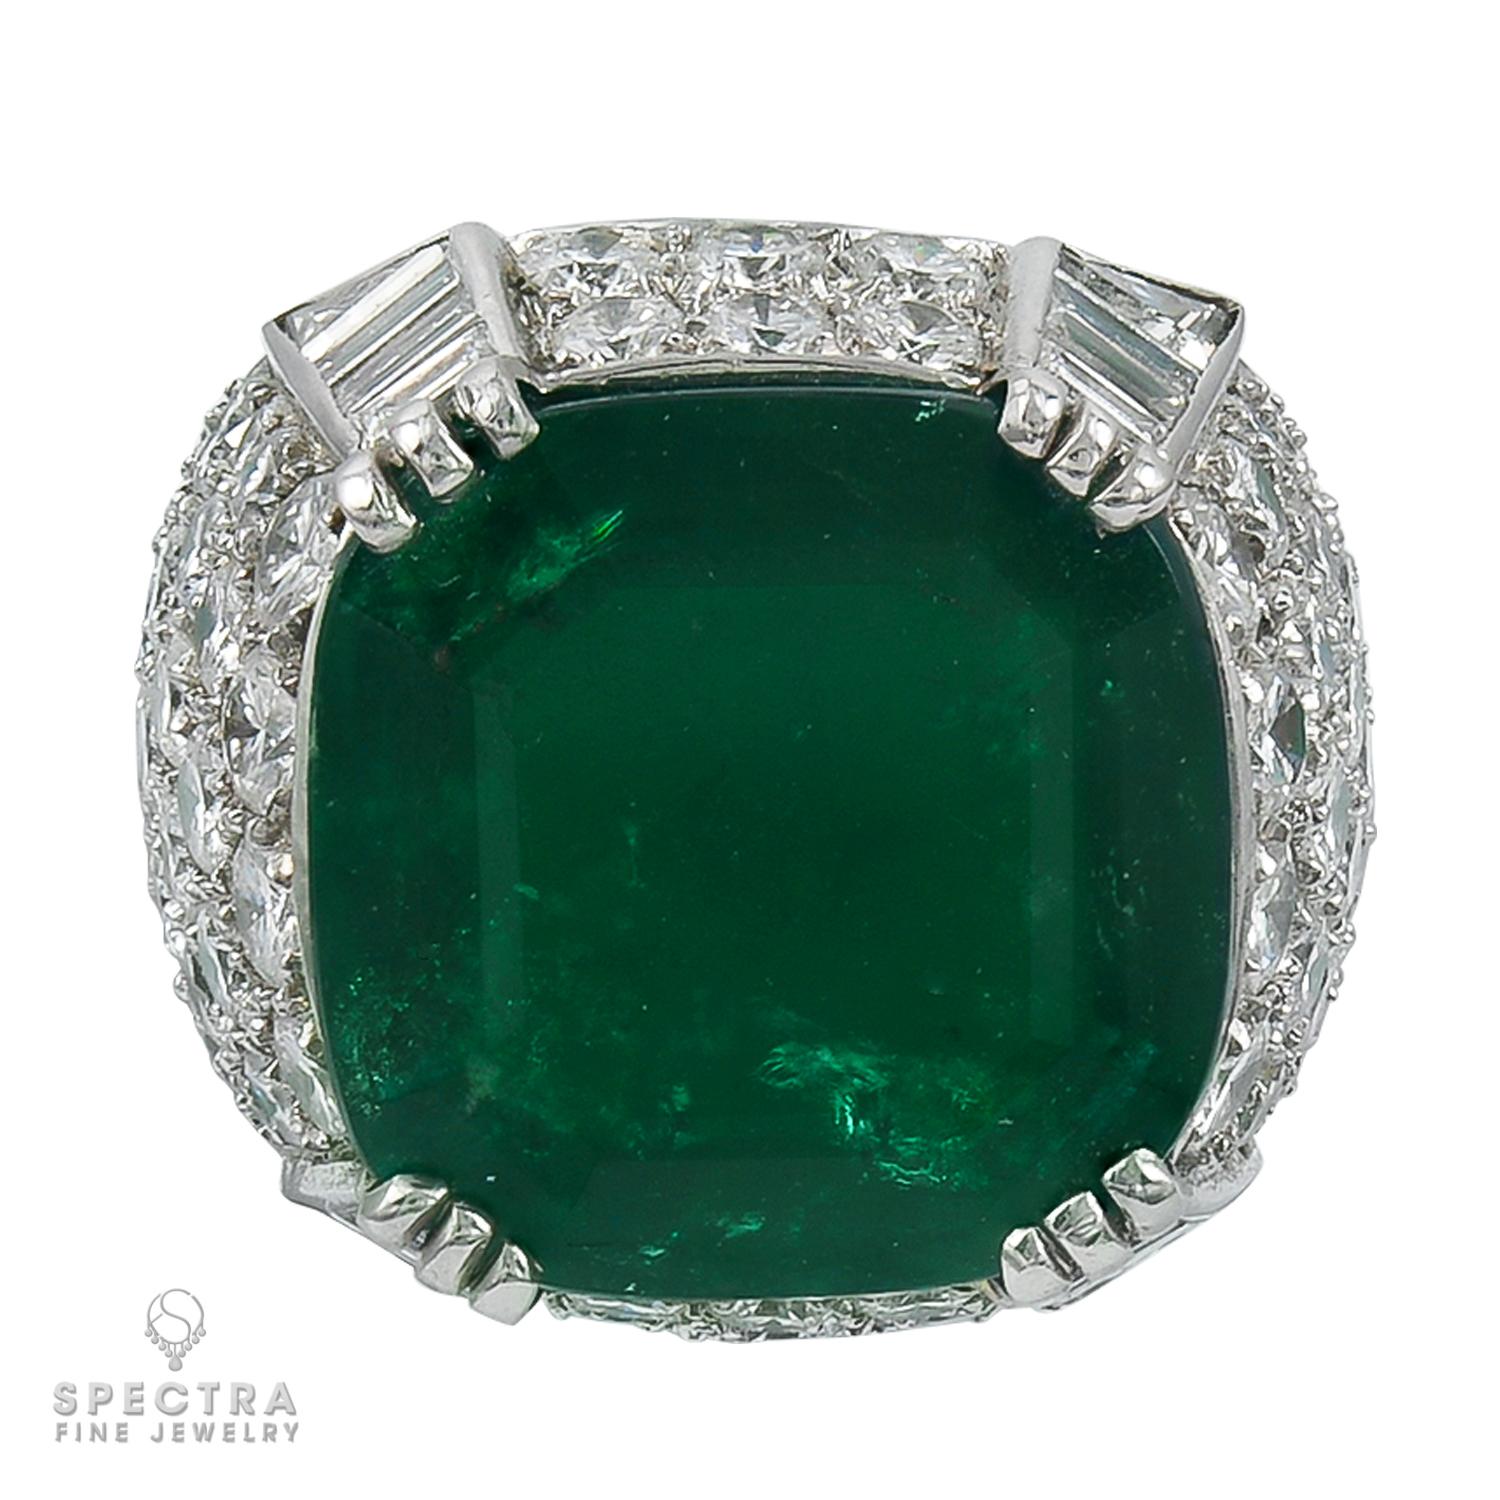 Behold the spectacular 2018 creation from Spectra Fine Jewelry—a Platinum Emerald and Diamond Cocktail Ring that captivates with its allure. The centerpiece is an awe-inspiring cushion-cut Colombian emerald weighing around 11.38 carats, certified by